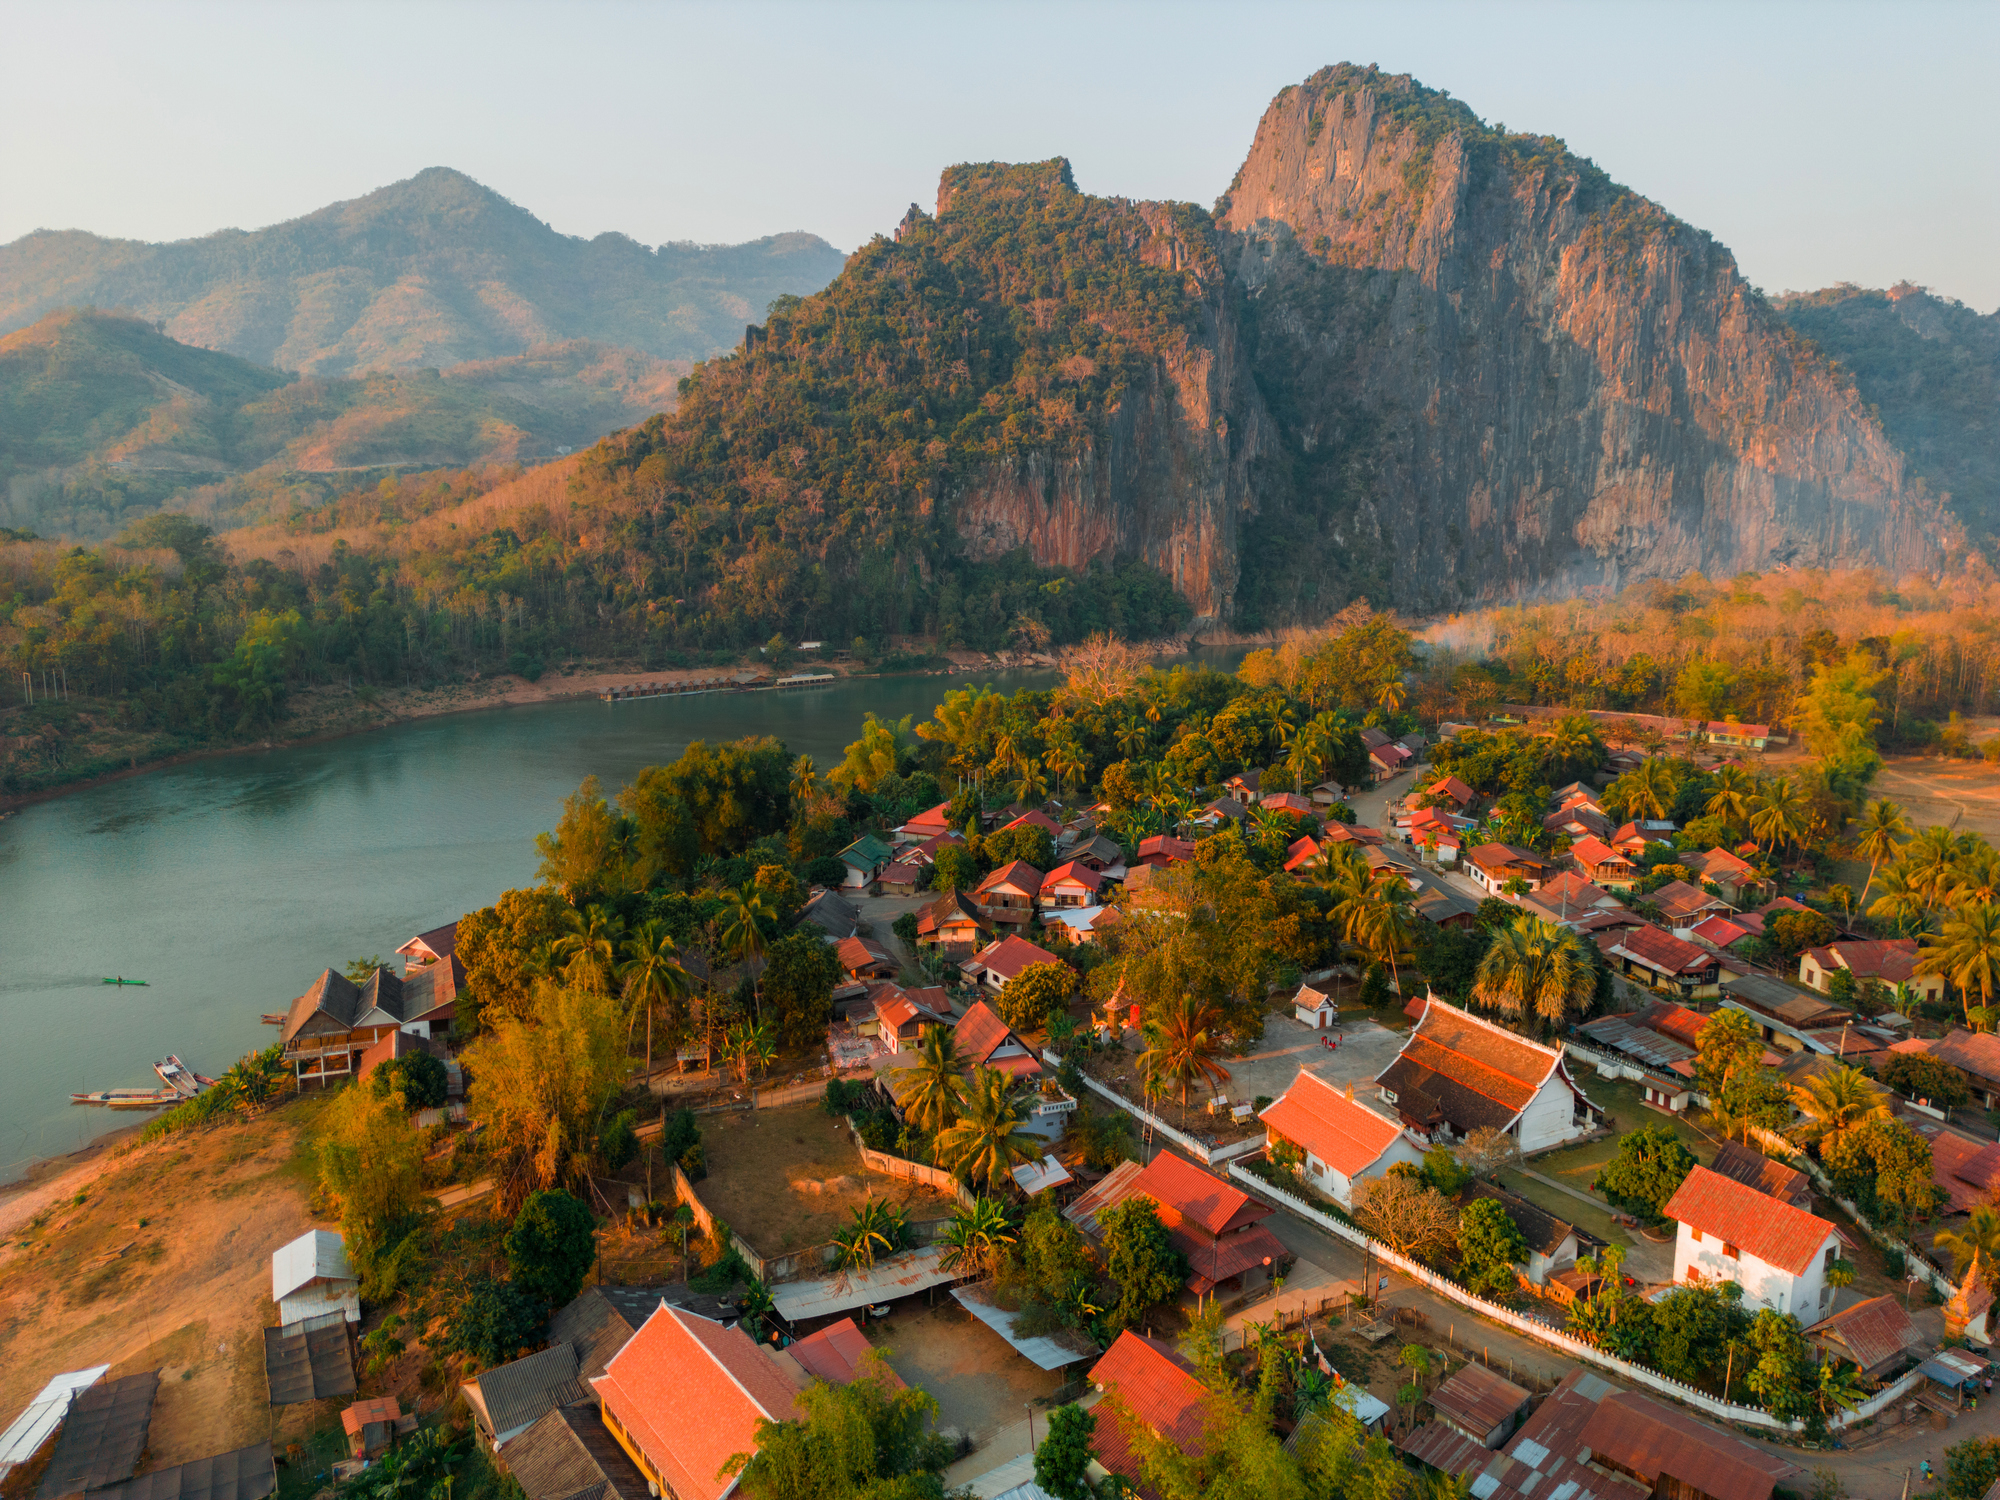 Aerial view of a town in Laos